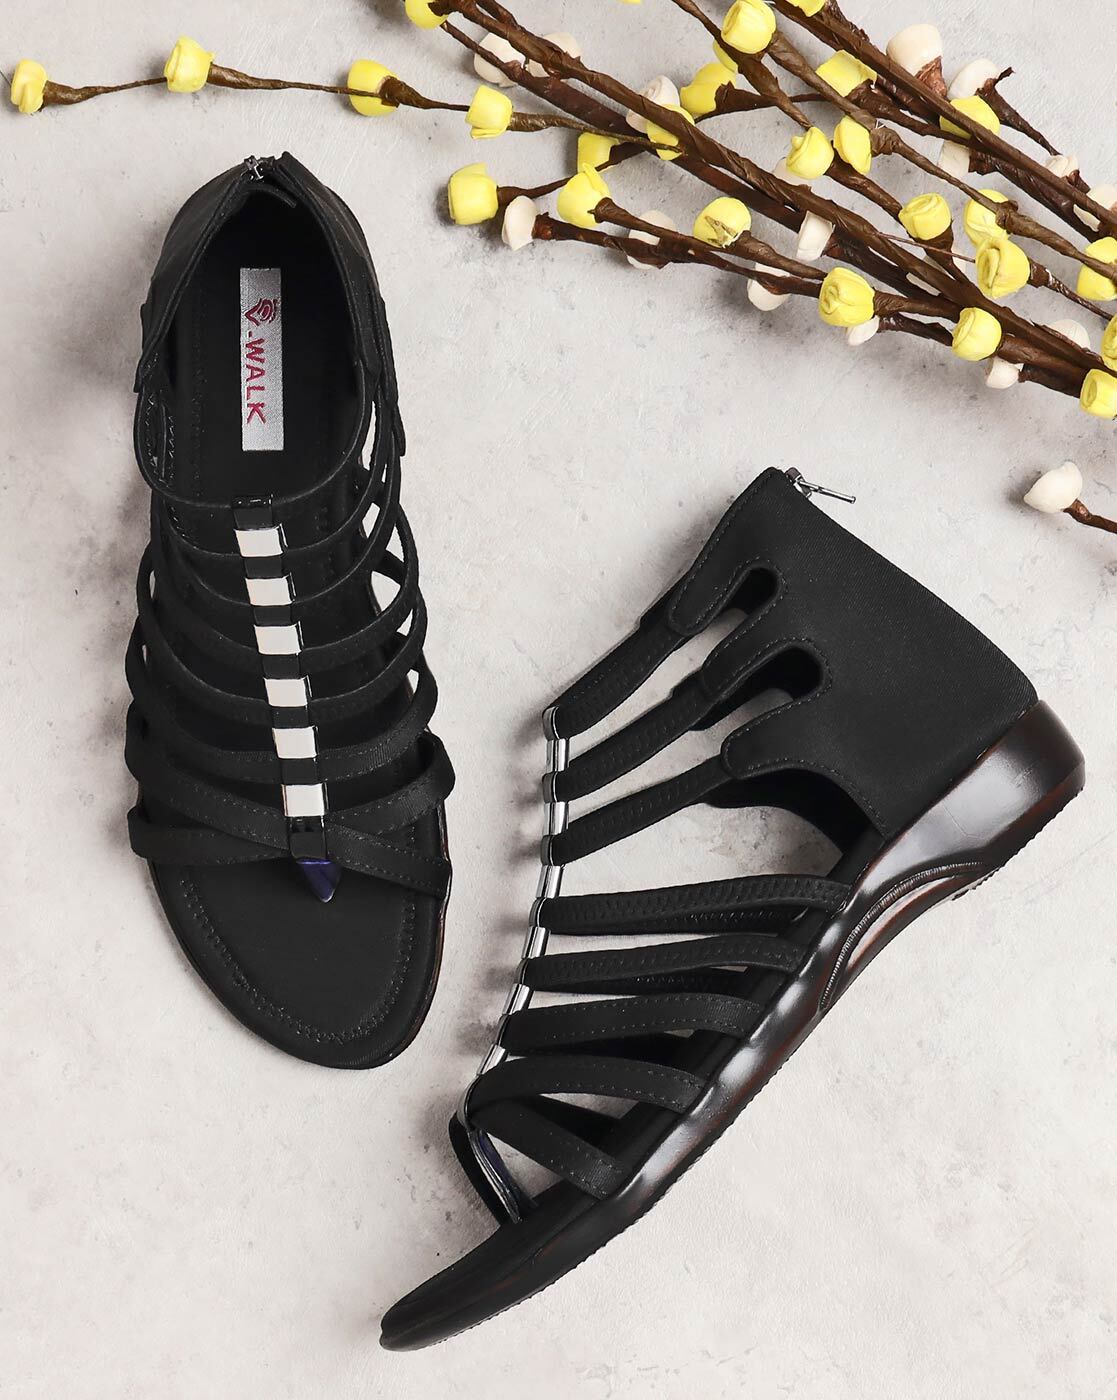 Womens Gladiator Knee High Roman Black Gladiator Sandals With Platform And  Block Heel Black And White Summer Boots From Xinzhi55, $64.33 | DHgate.Com